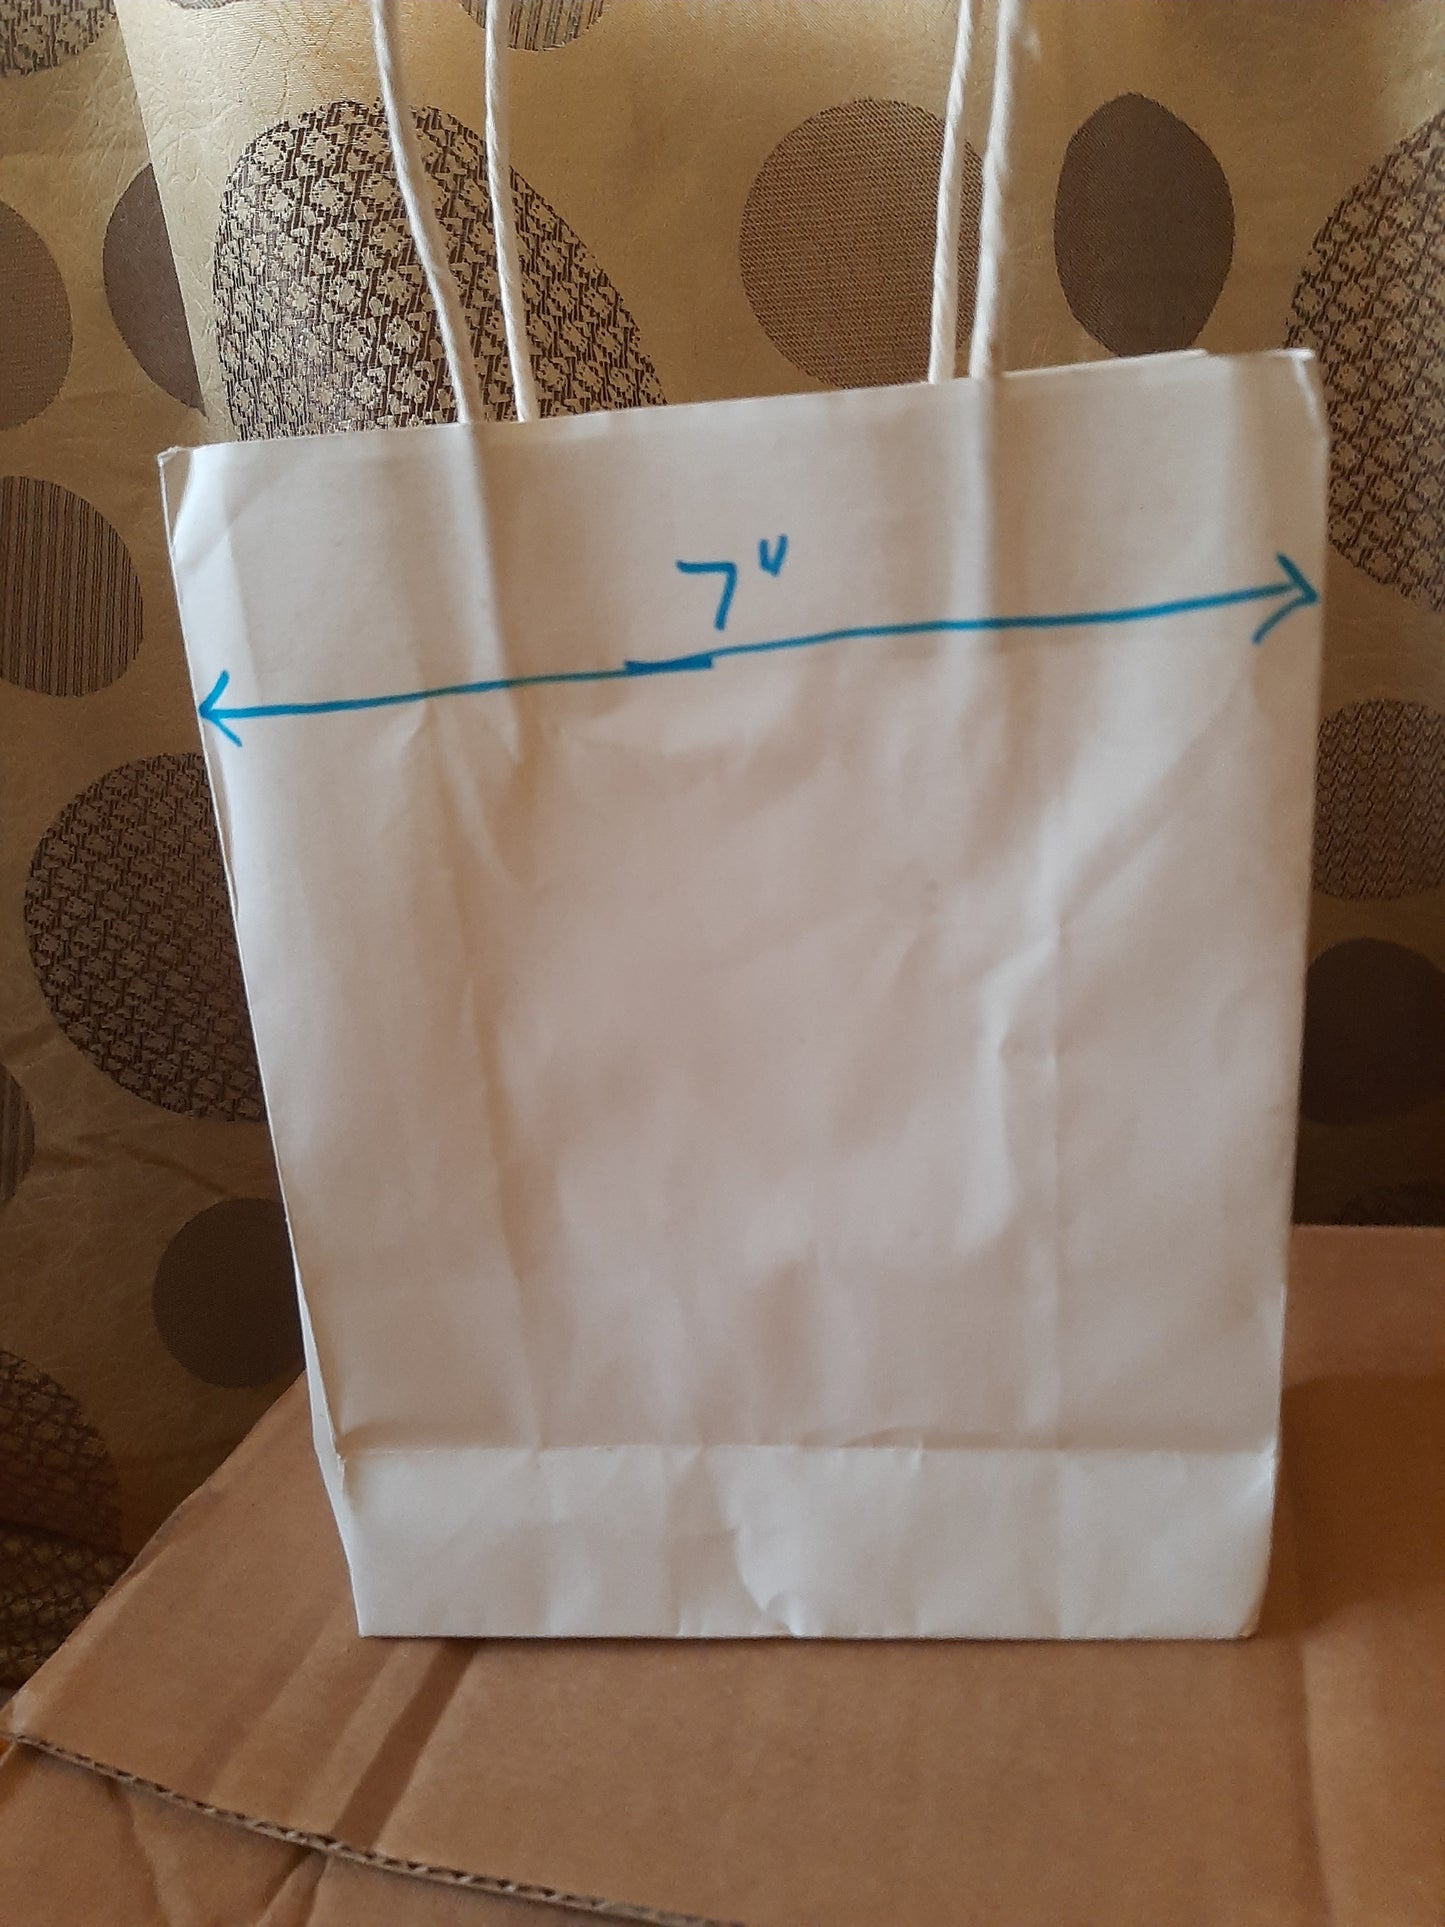 White Party Bags with handle